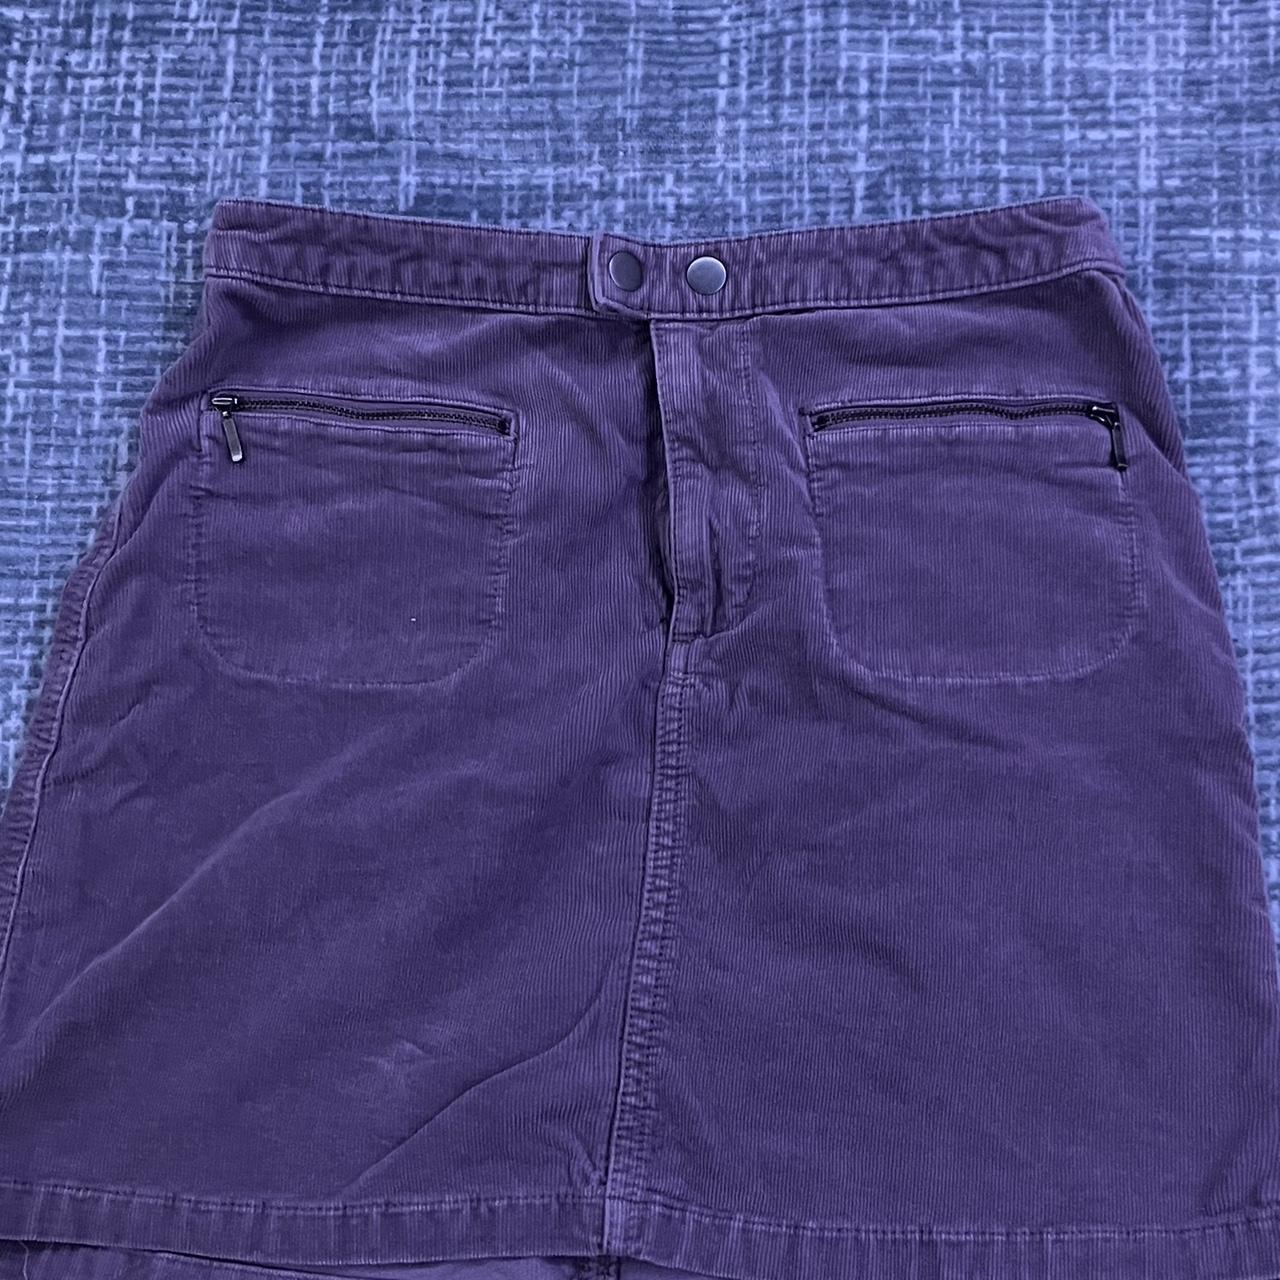 Mossimo Purple skirt worn a few times but in great... - Depop